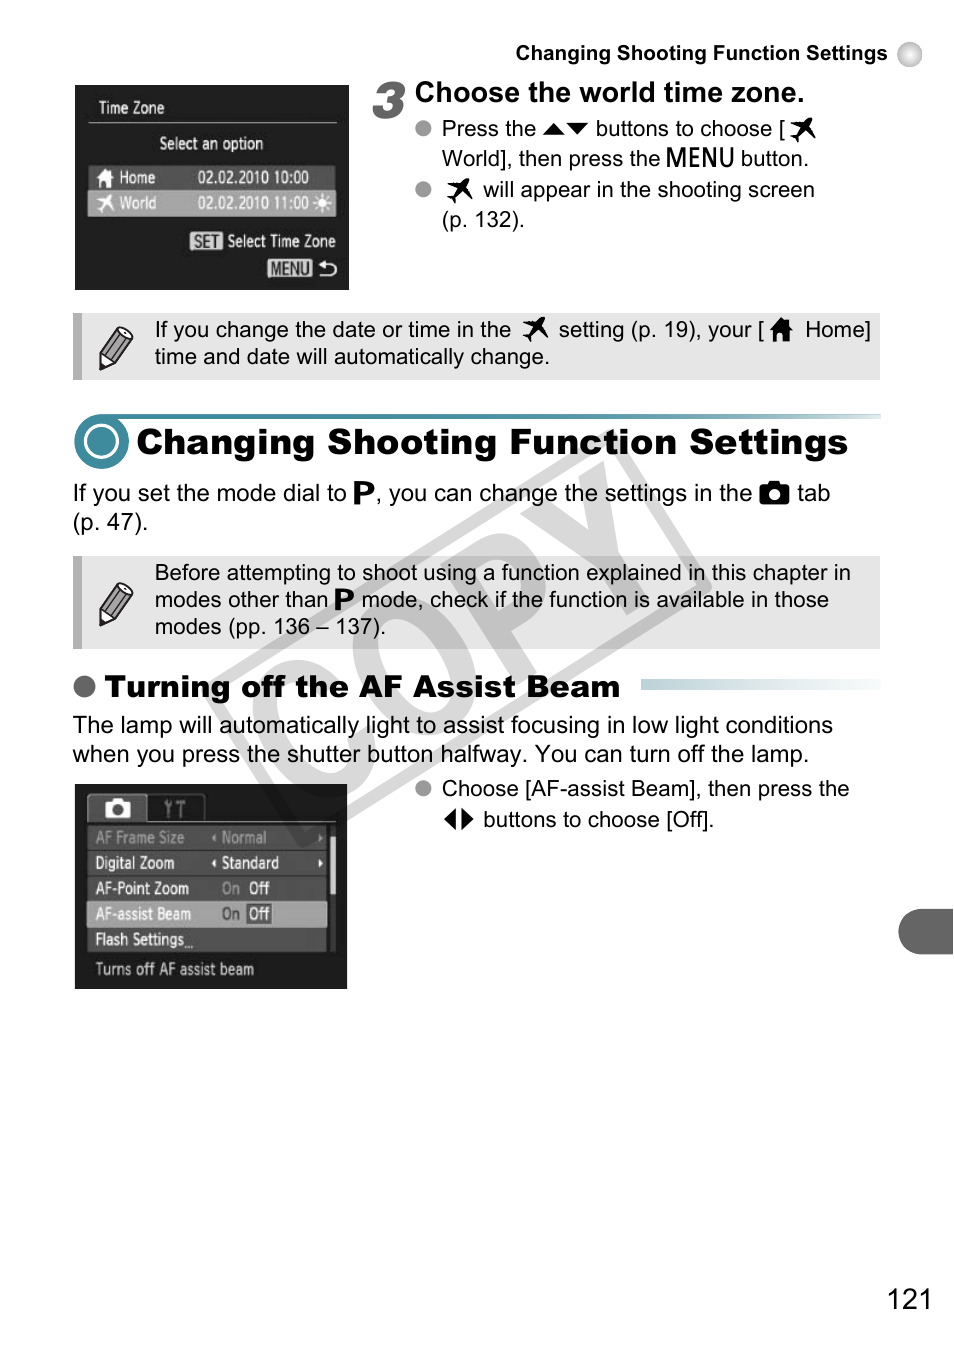 Changing shooting function settings, P. 121), Co py | Canon A3000 IS User Manual | Page 121 / 148